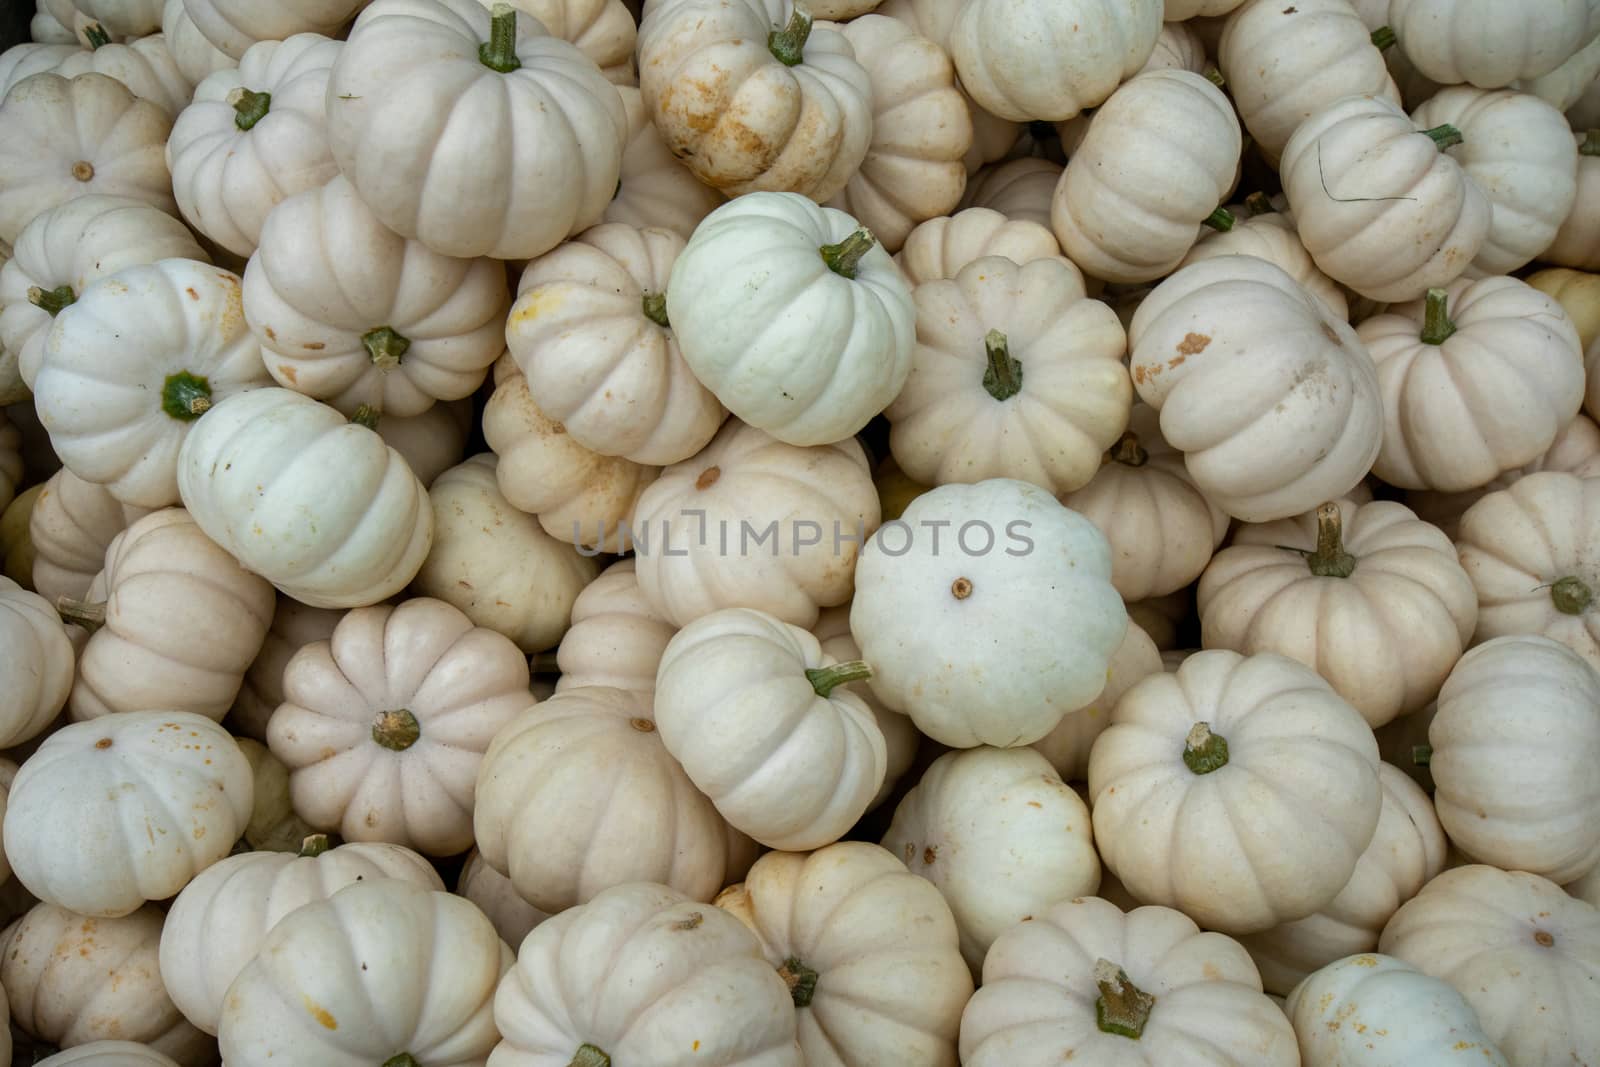 A Pile of Small White Pumpkins in a Wooden Box in a Farmer's Market Filling the Frame